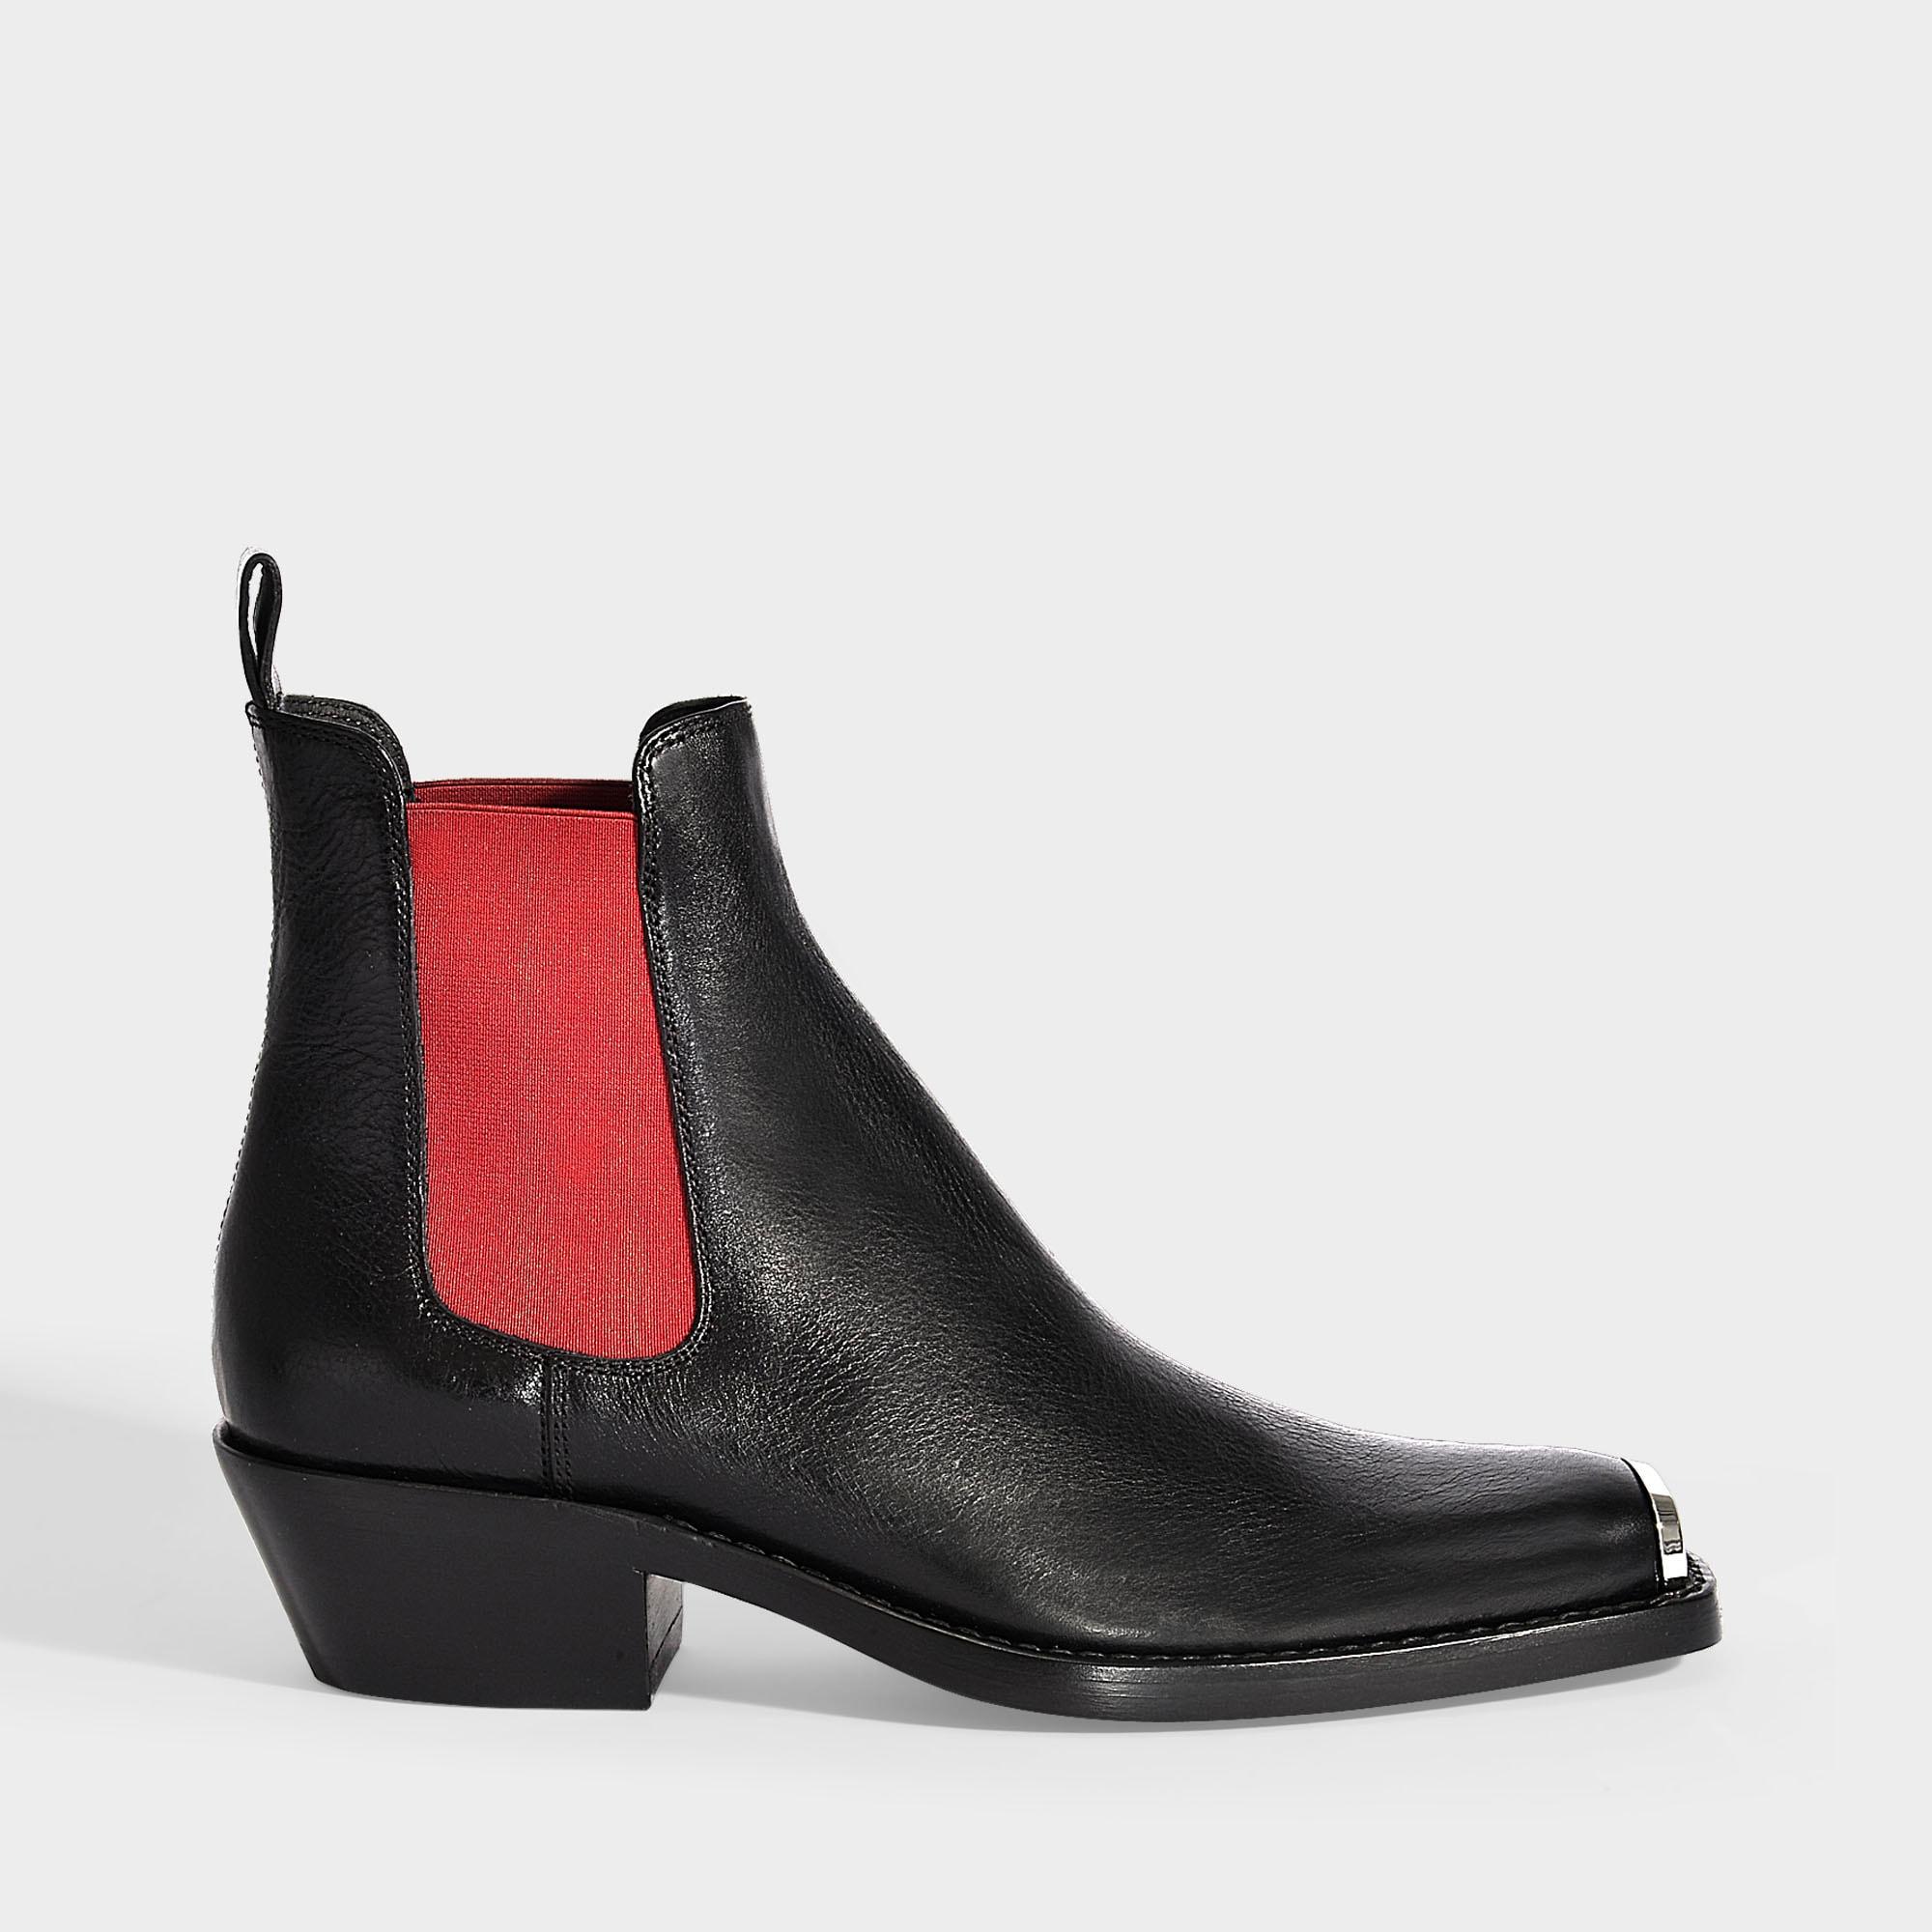 Calvin Klein Silver Toe Chelsea Boots In Calf Leather in Black Red (Black)  - Lyst